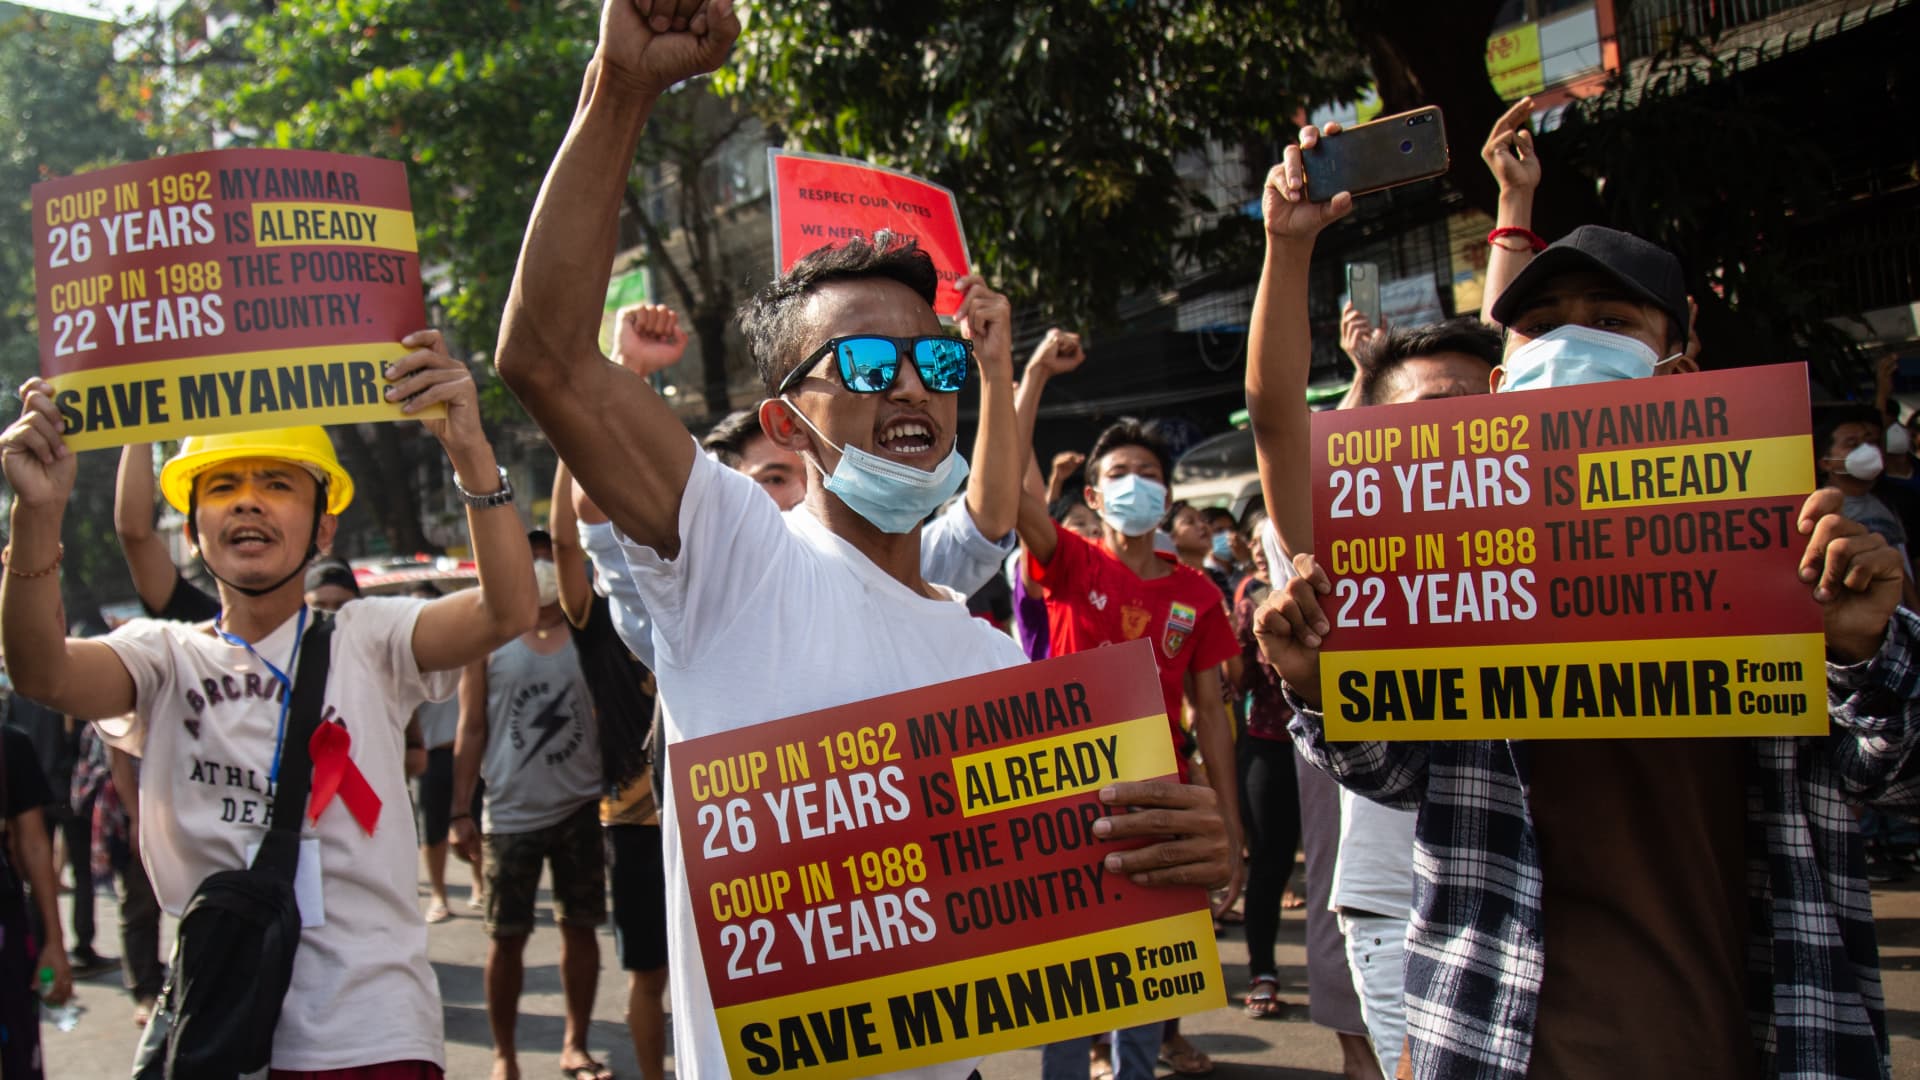 Protesters demonstrate against the military coup in Yangon, and demanded the release of detained State Counsellor of Myanmar Aung San Suu Kyi.